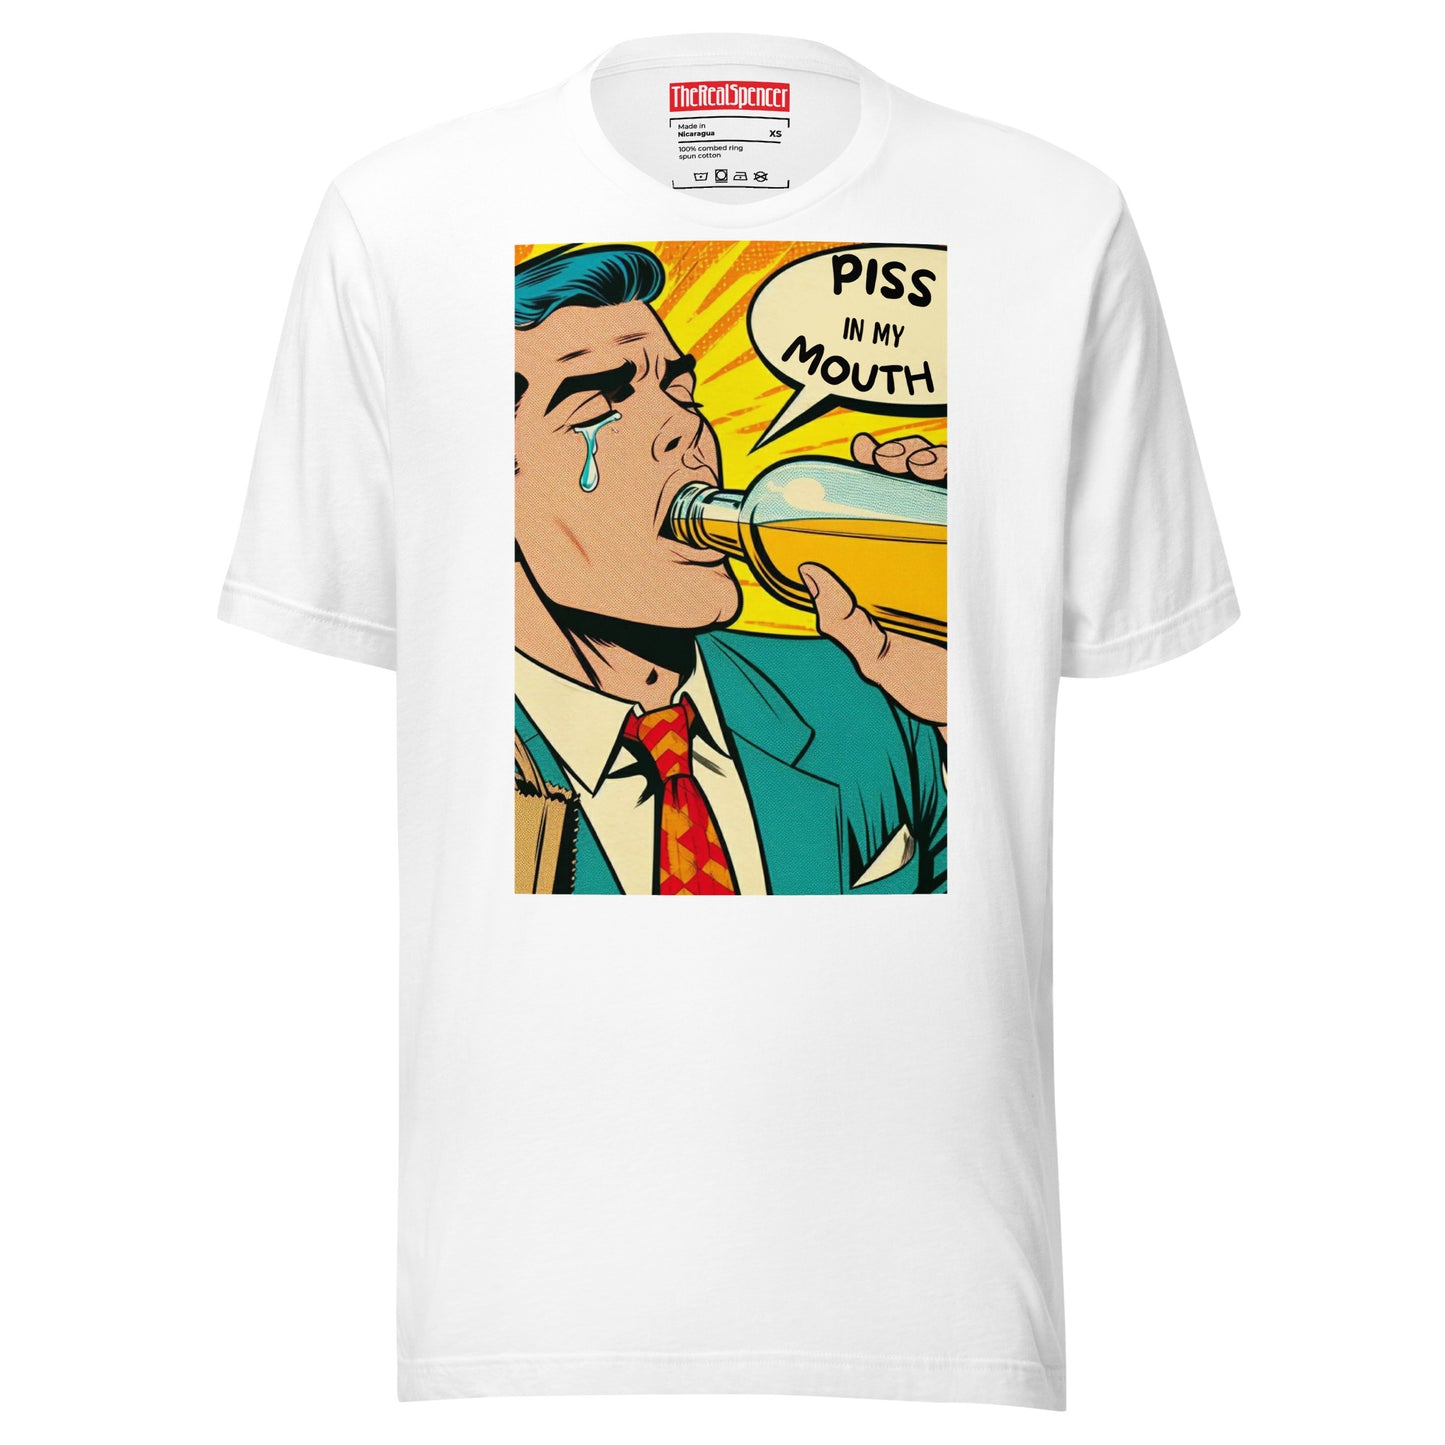 Piss In My Mouth T-Shirt